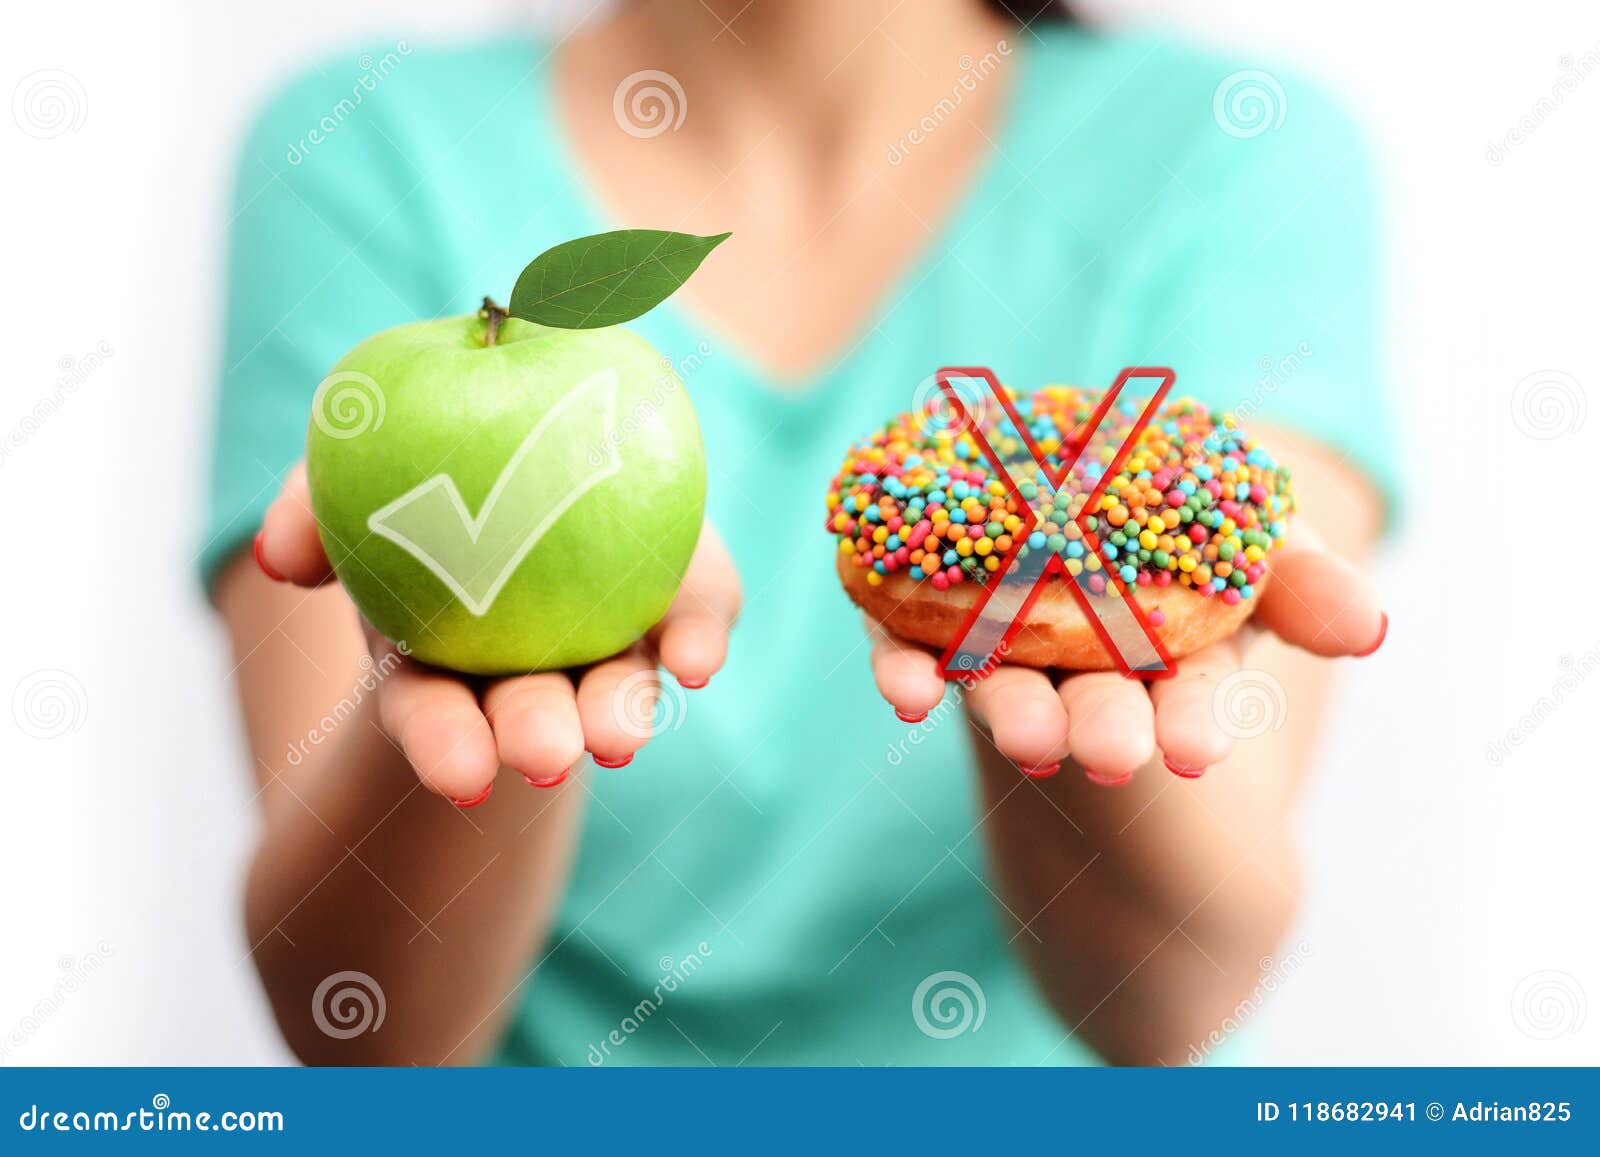 healthy lifestyle concept, choose healthy fruits and not processed sweets